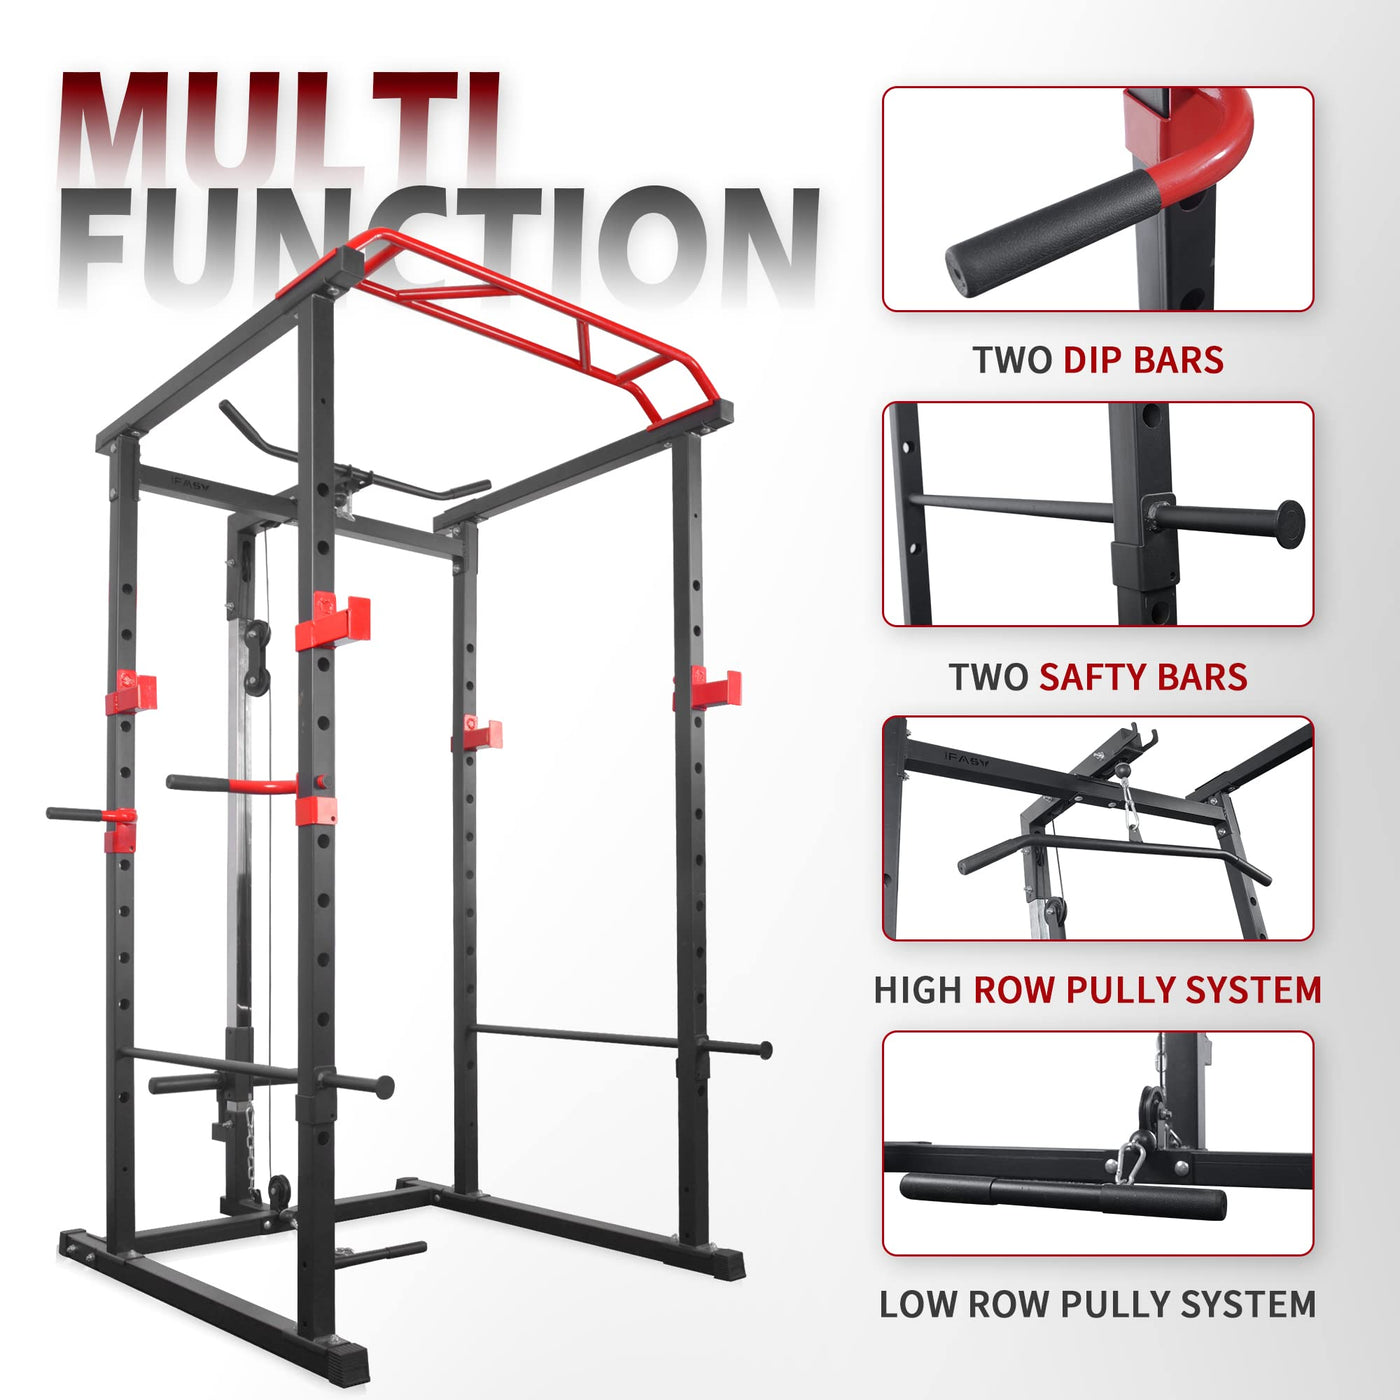 IFAST power rack structure